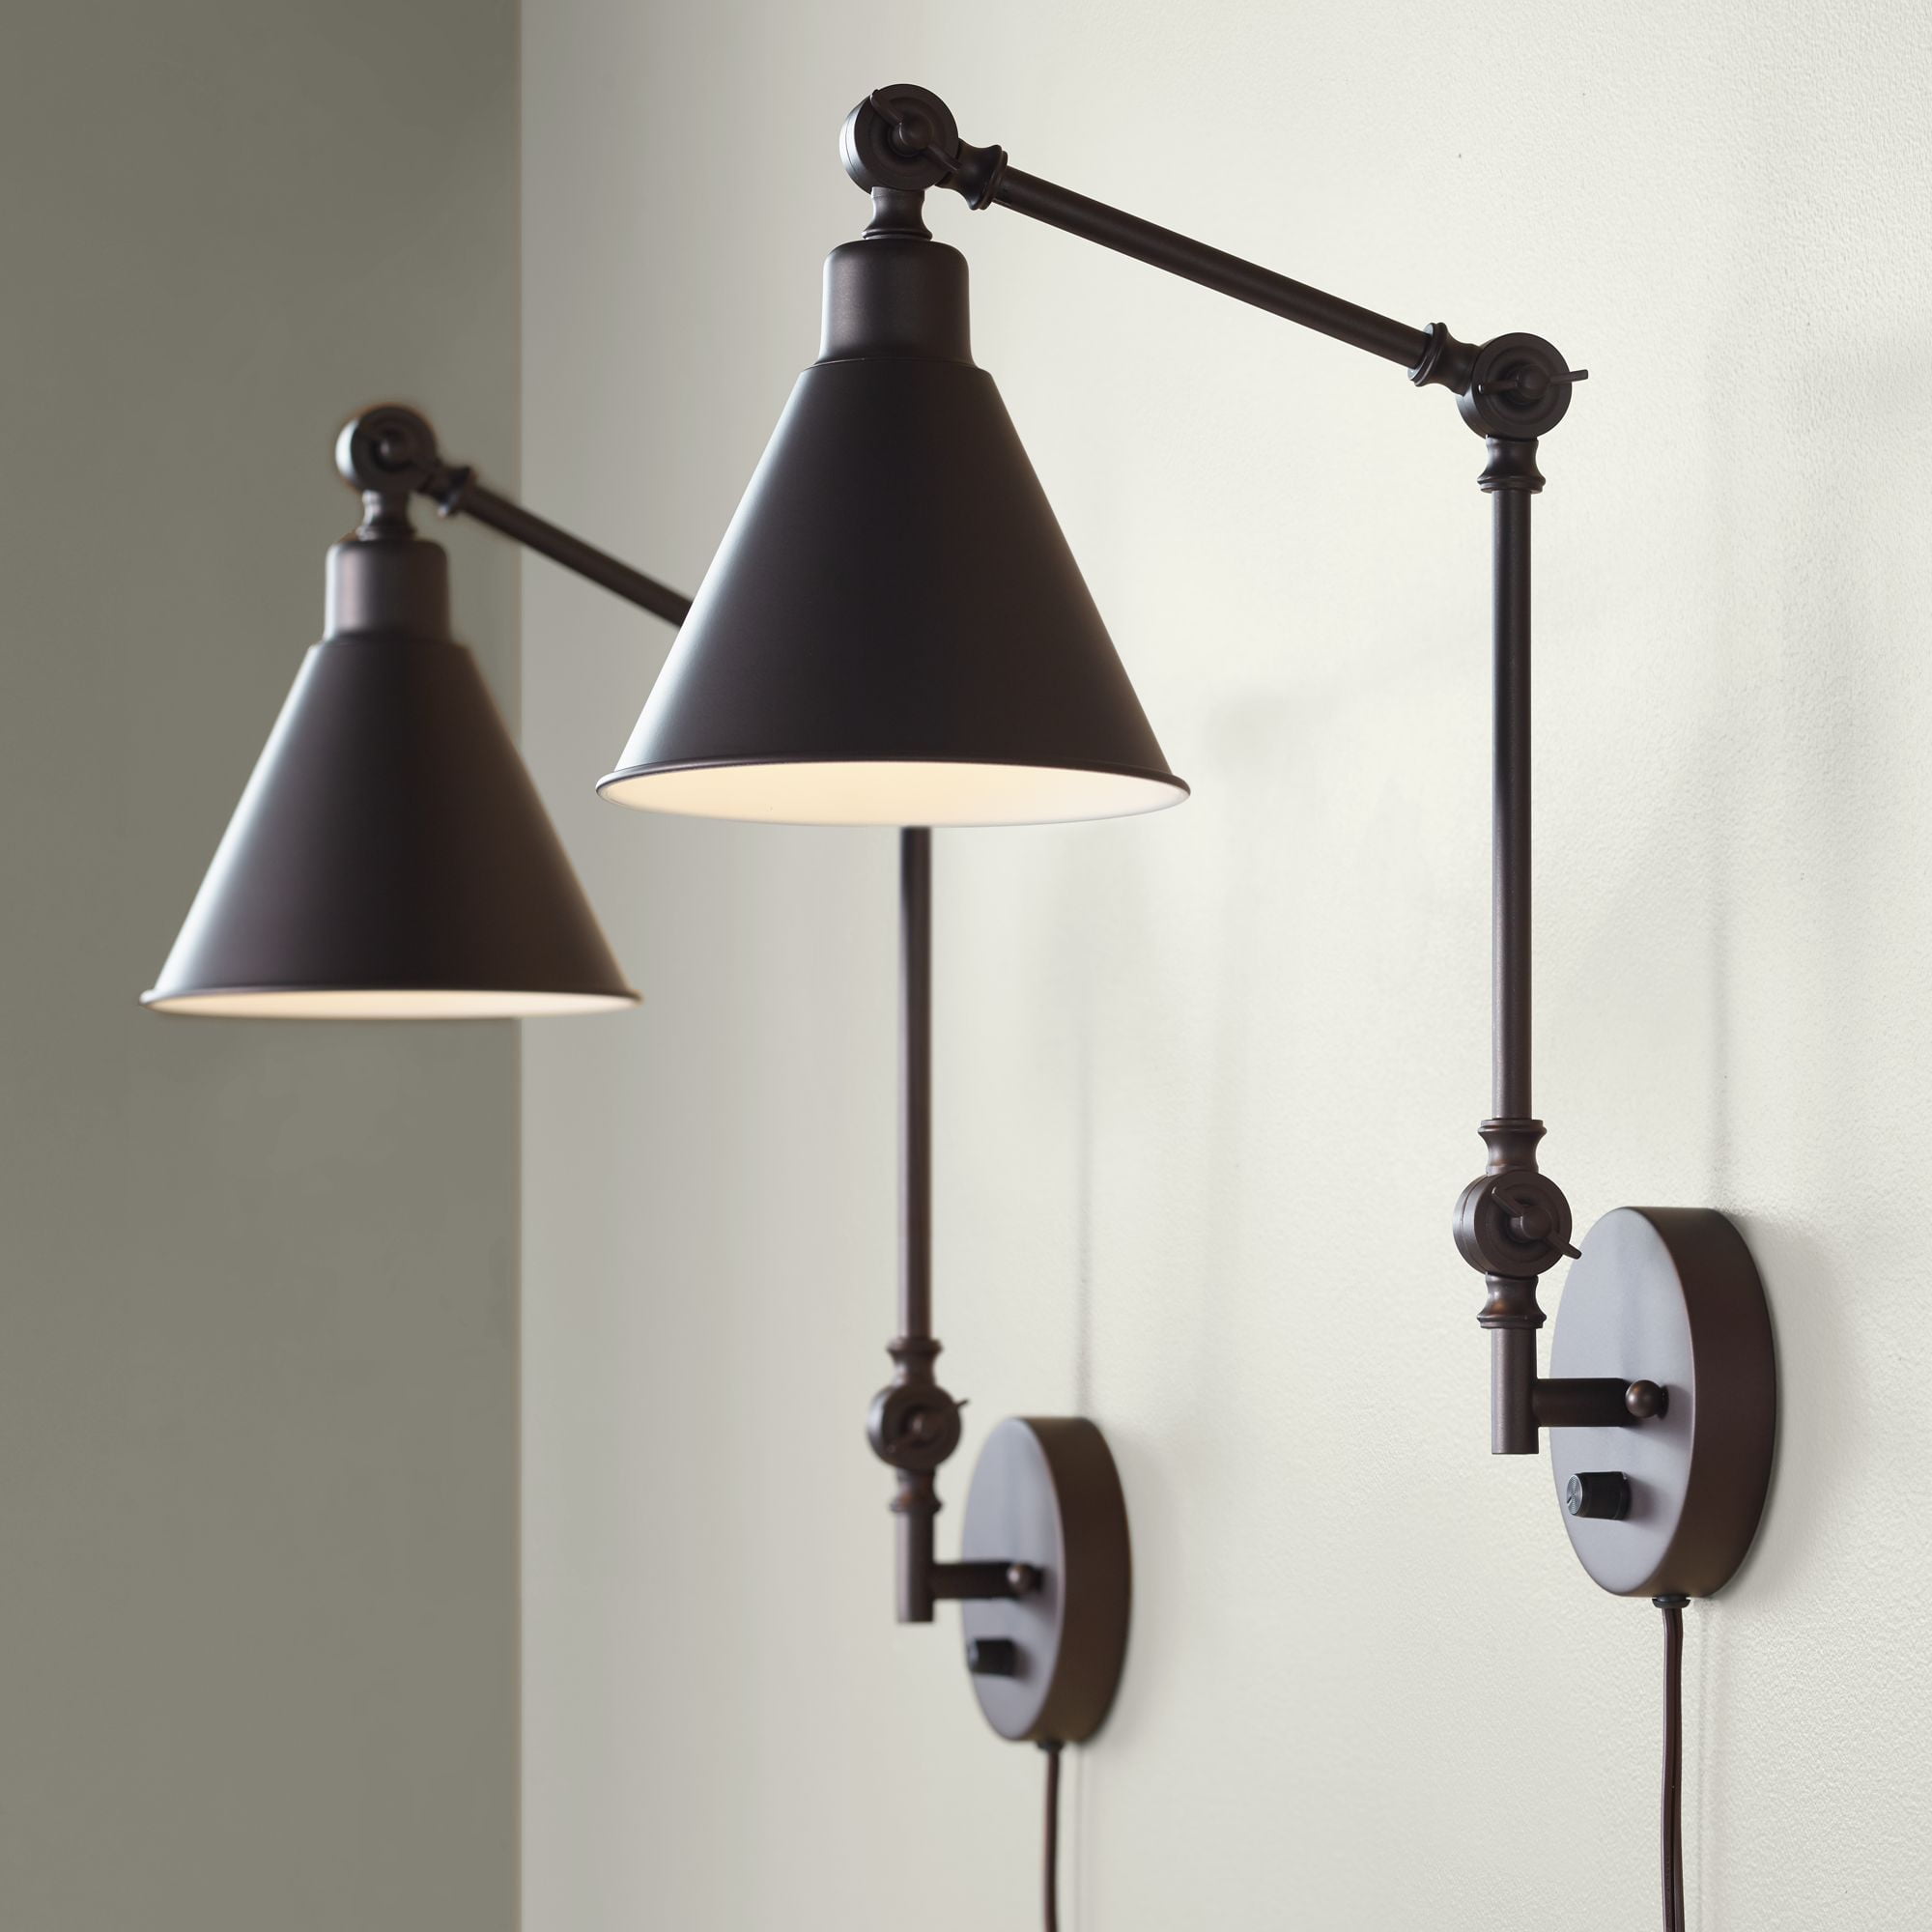 Swing Arm Wall Lights Set Of 2 Lamps, How High To Install Swing Arm Lamp